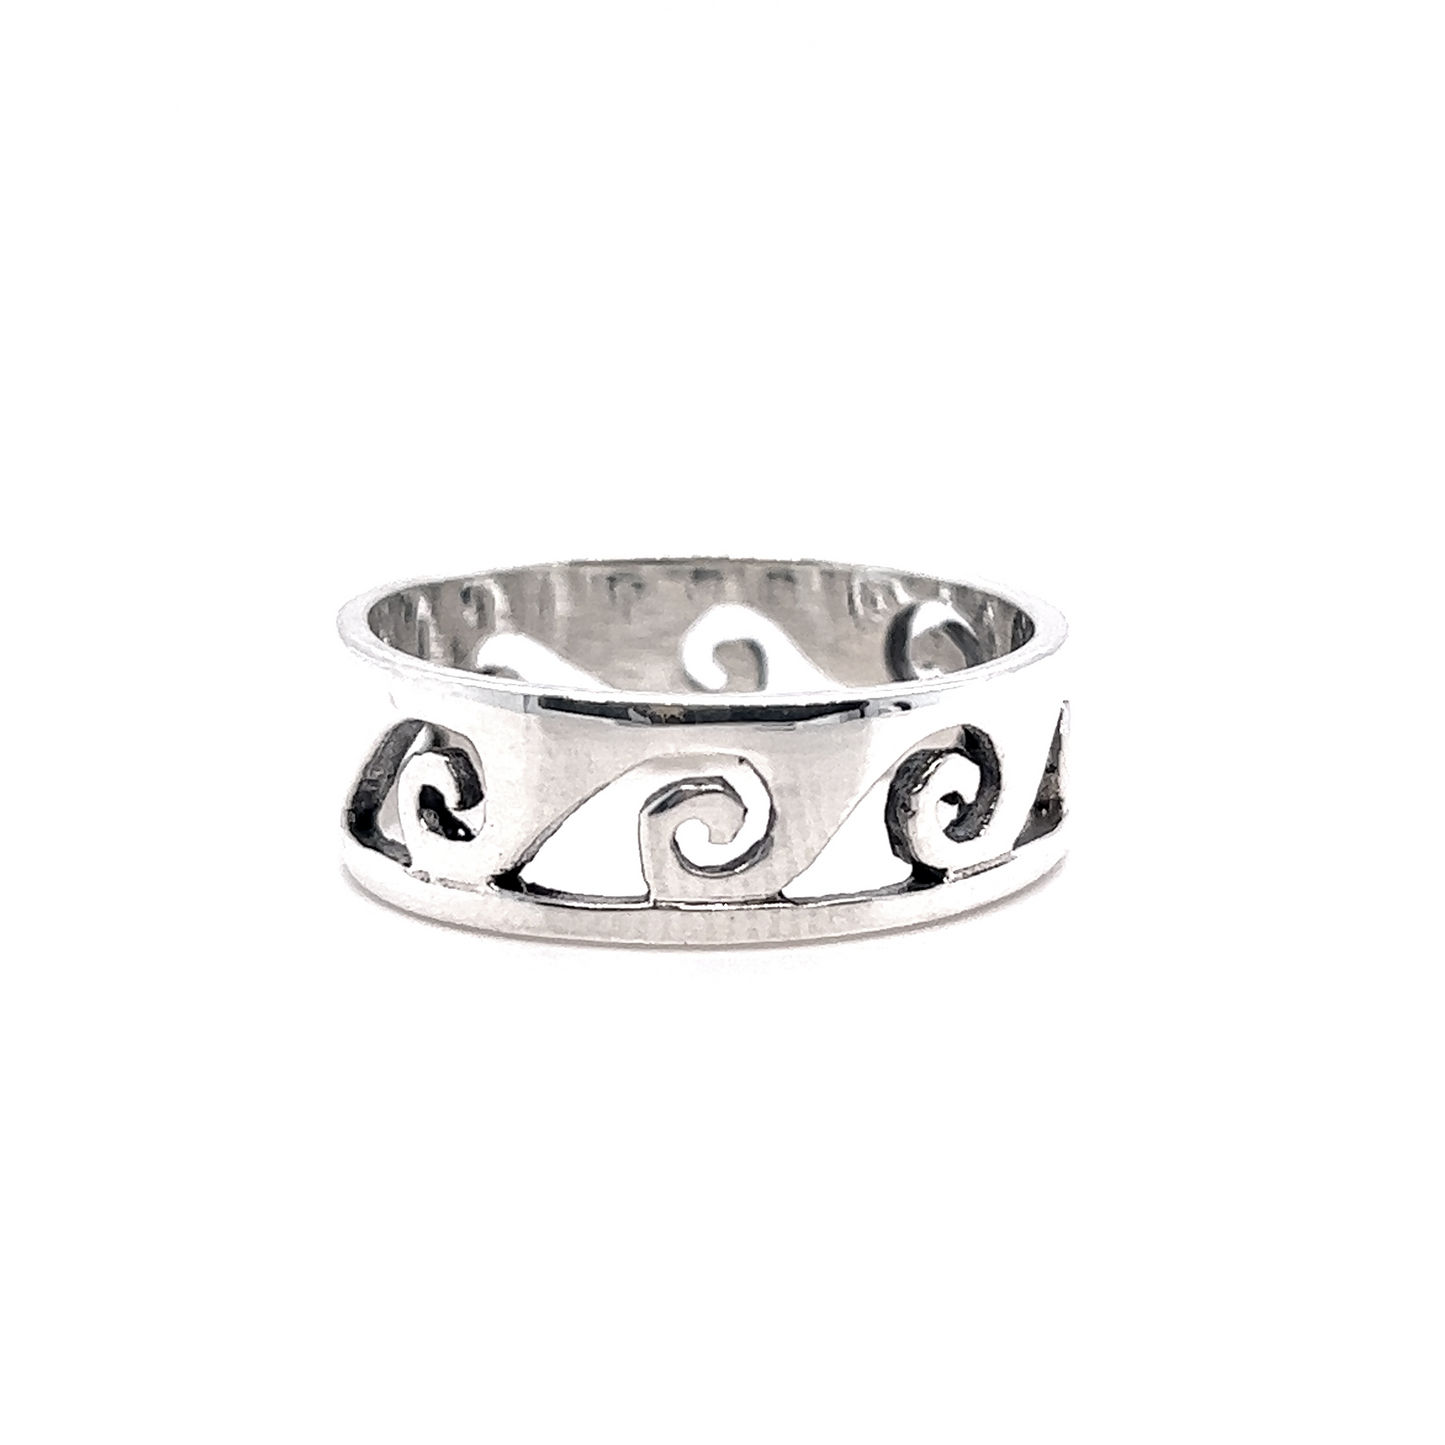 A silver 7mm Cutout Wave Band with swirls on it.